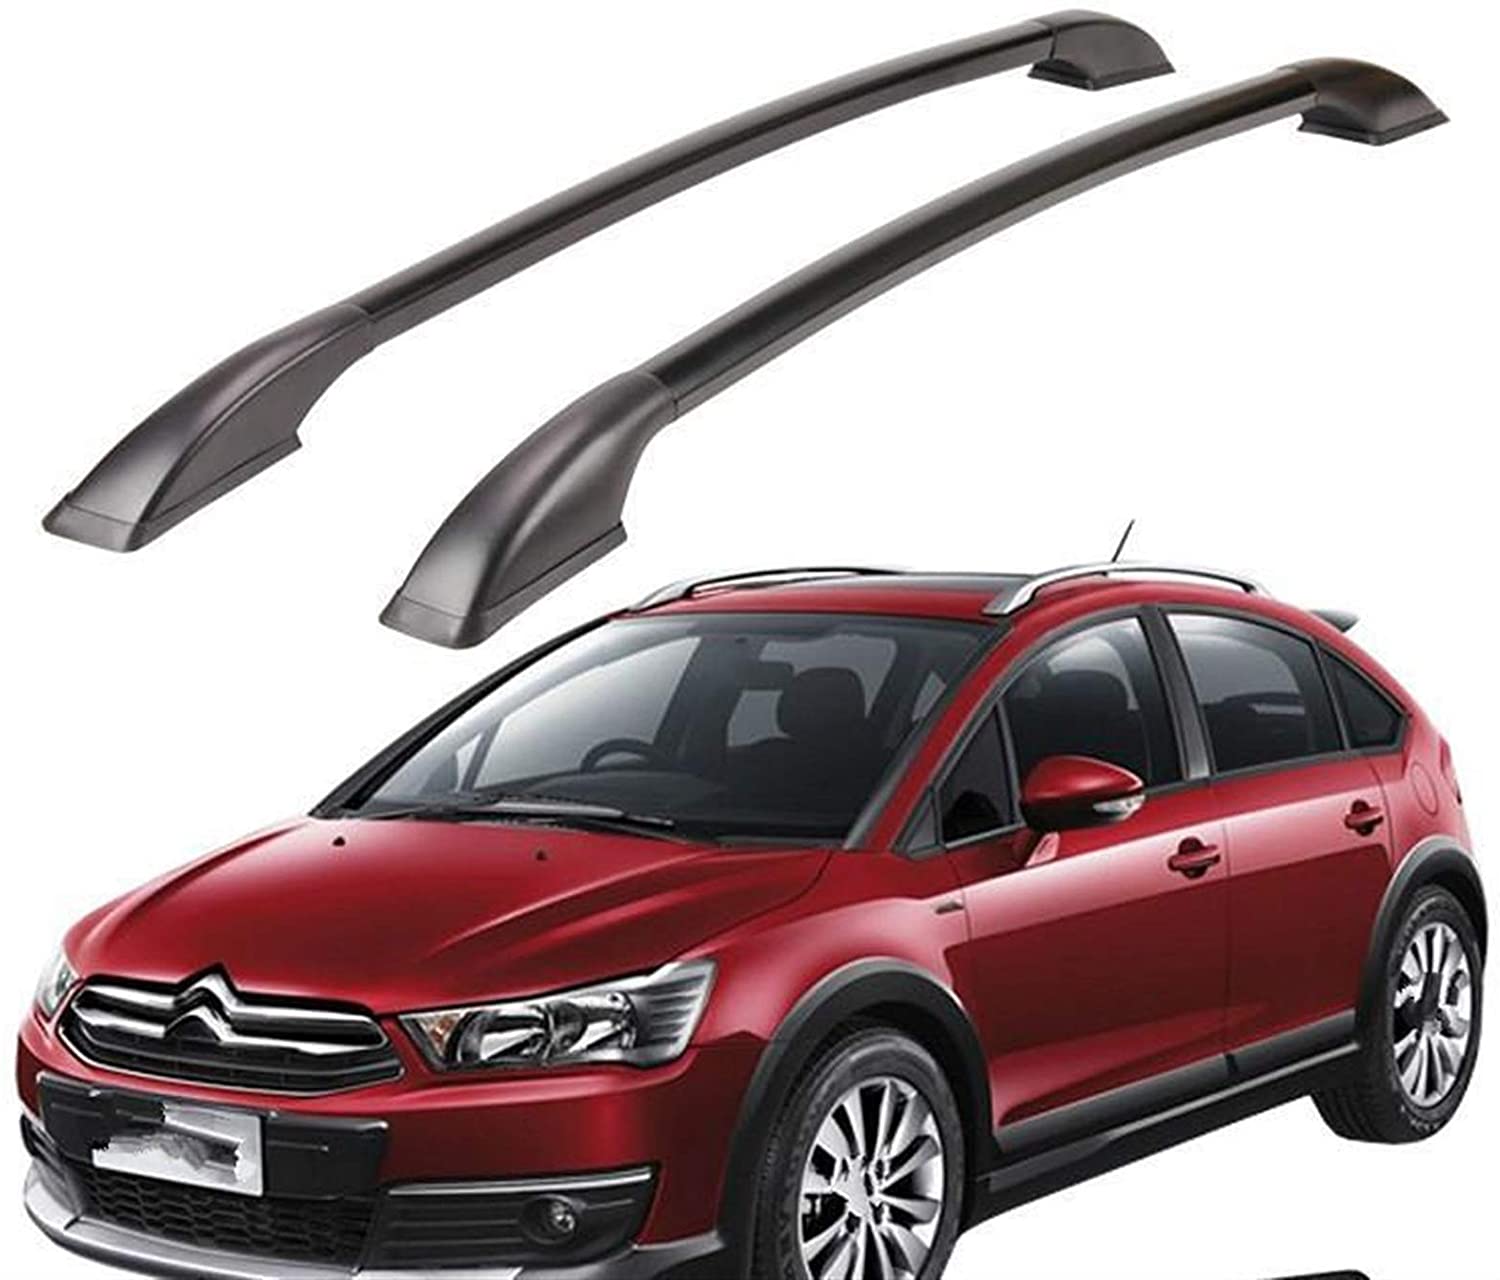 Car Luggage Rack Without Perforation for Citroen Sega 1.3 Meters Abs Luggage Rack Car Accessories Protection Apply to Automobiles (Color : 1)